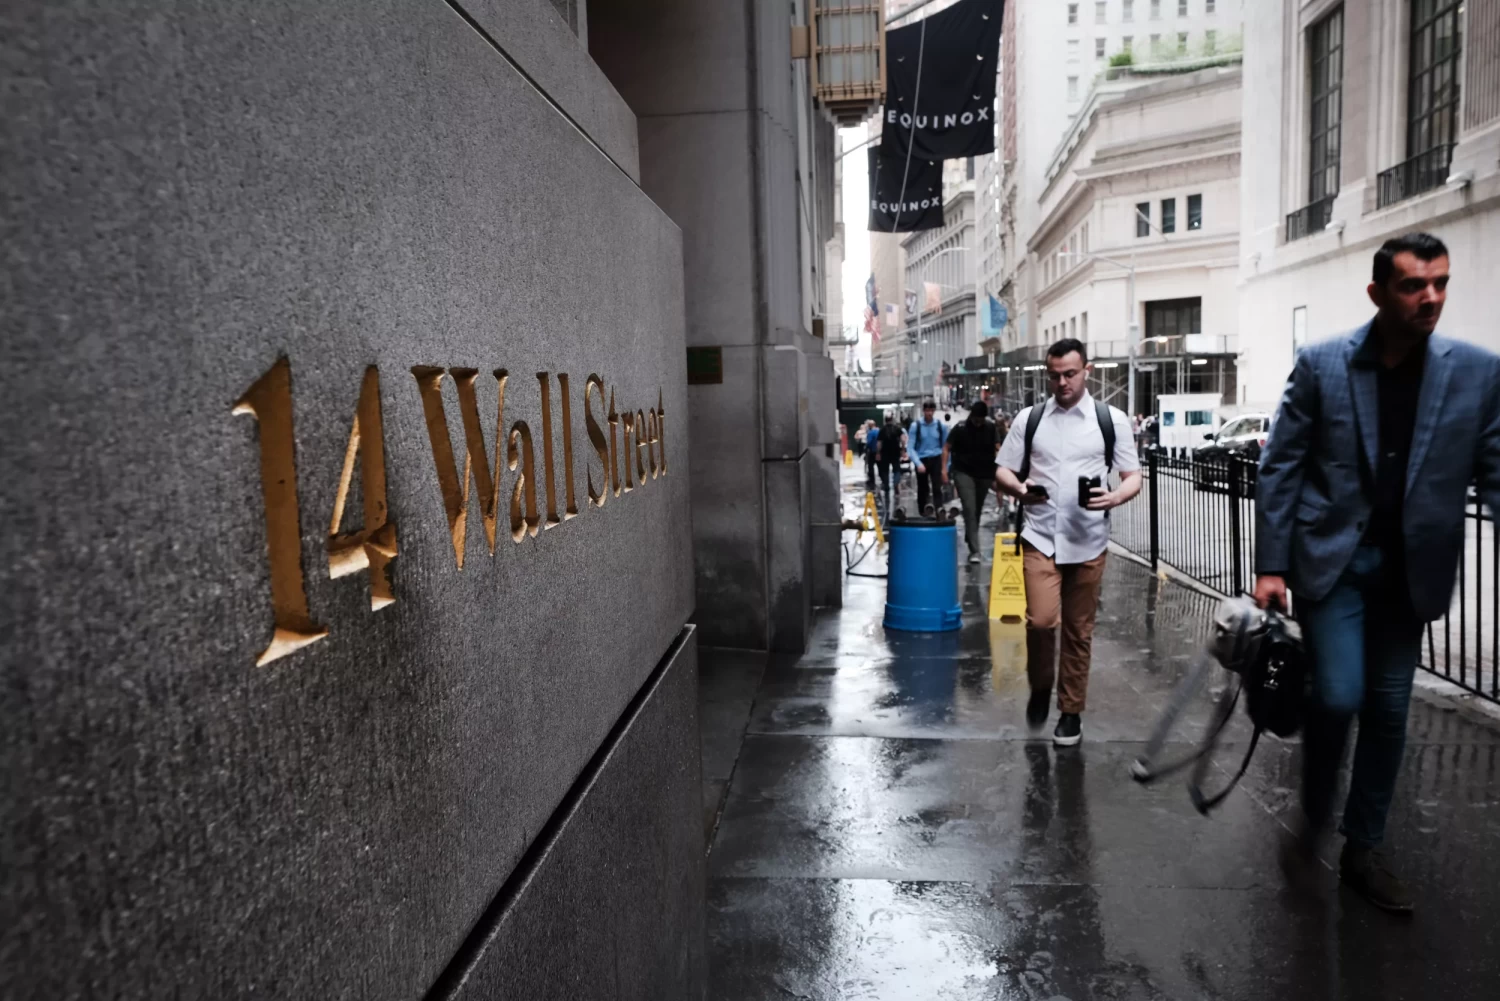 The share of Americans who believe the U.S. is in a recession crossed the 50 percent mark this month. People walk by the New York Stock Exchange (NYSE) on June 14, 2022 in New York City SPENCER PLATT/GETTY